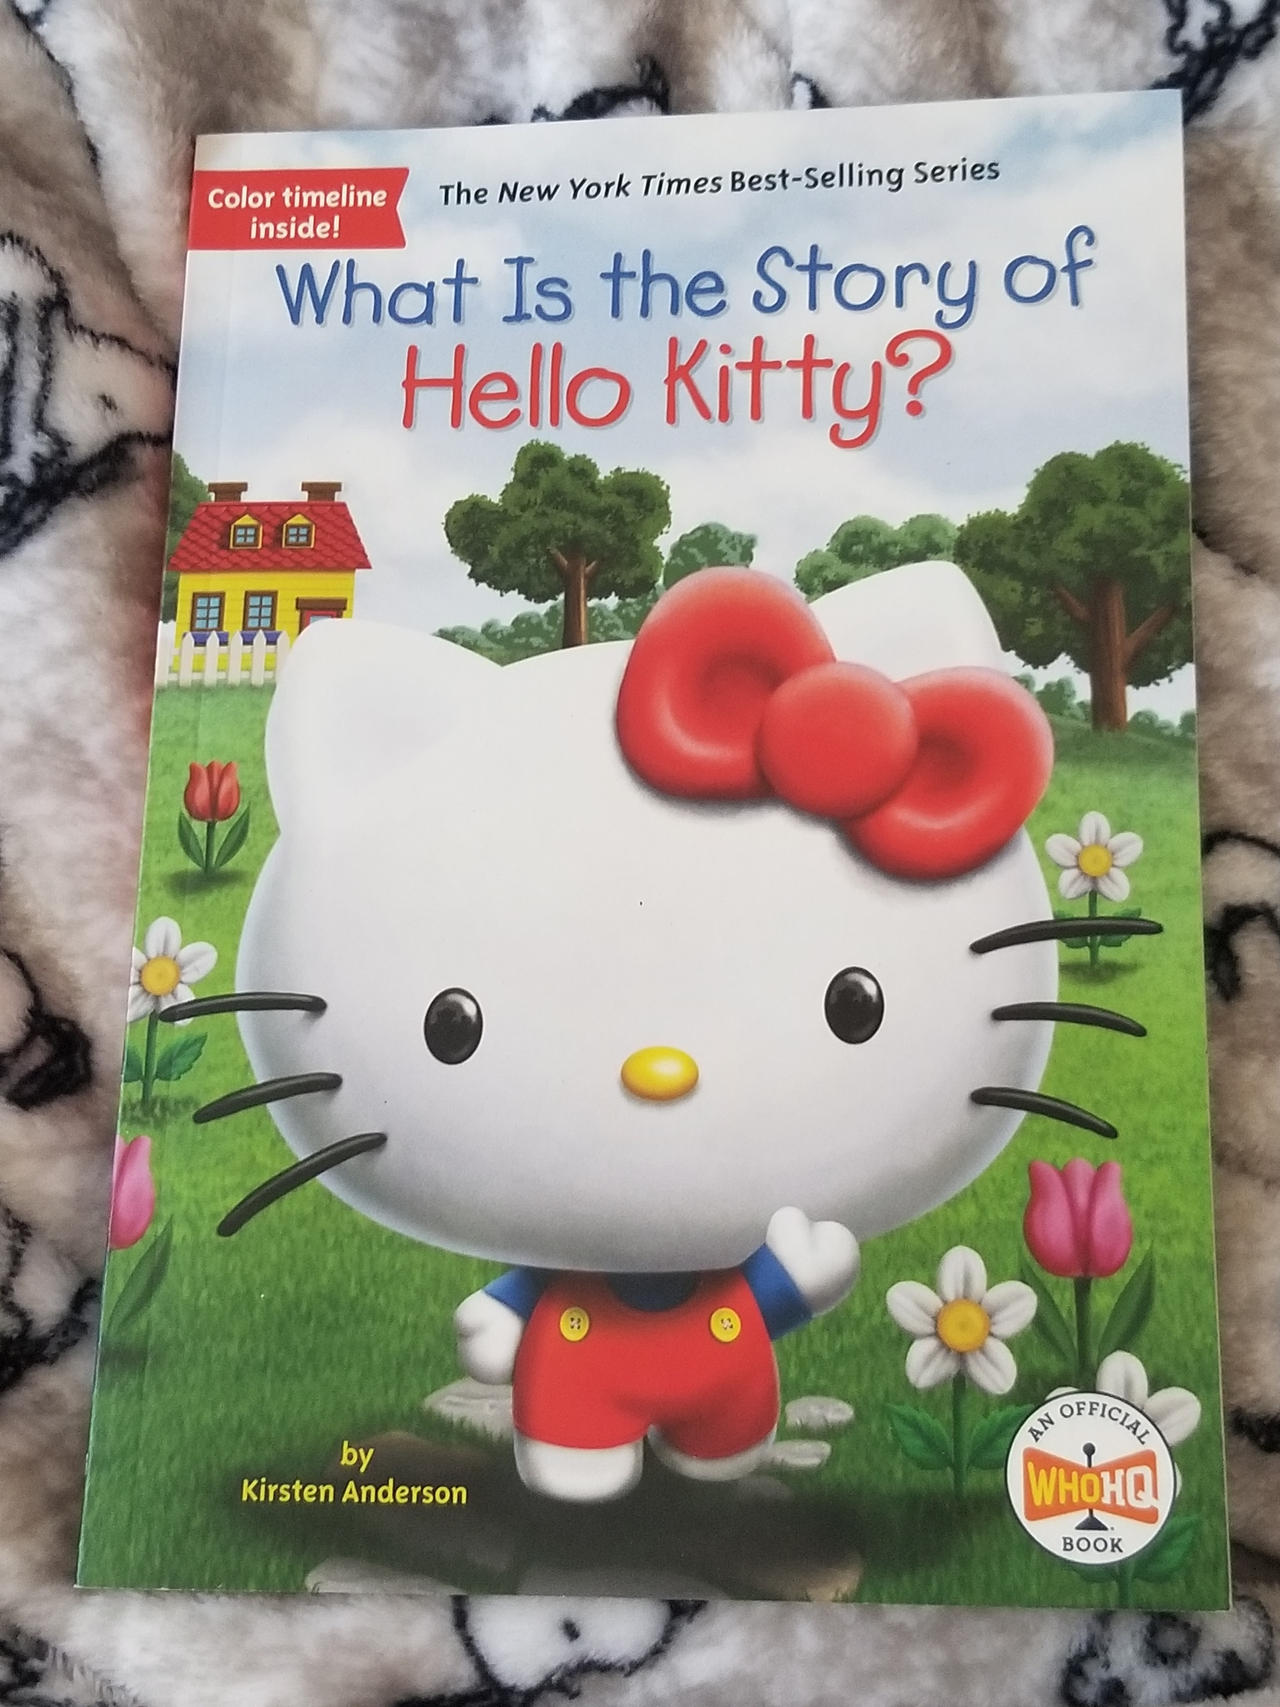 how long will the hello kitty movie｜TikTok Search